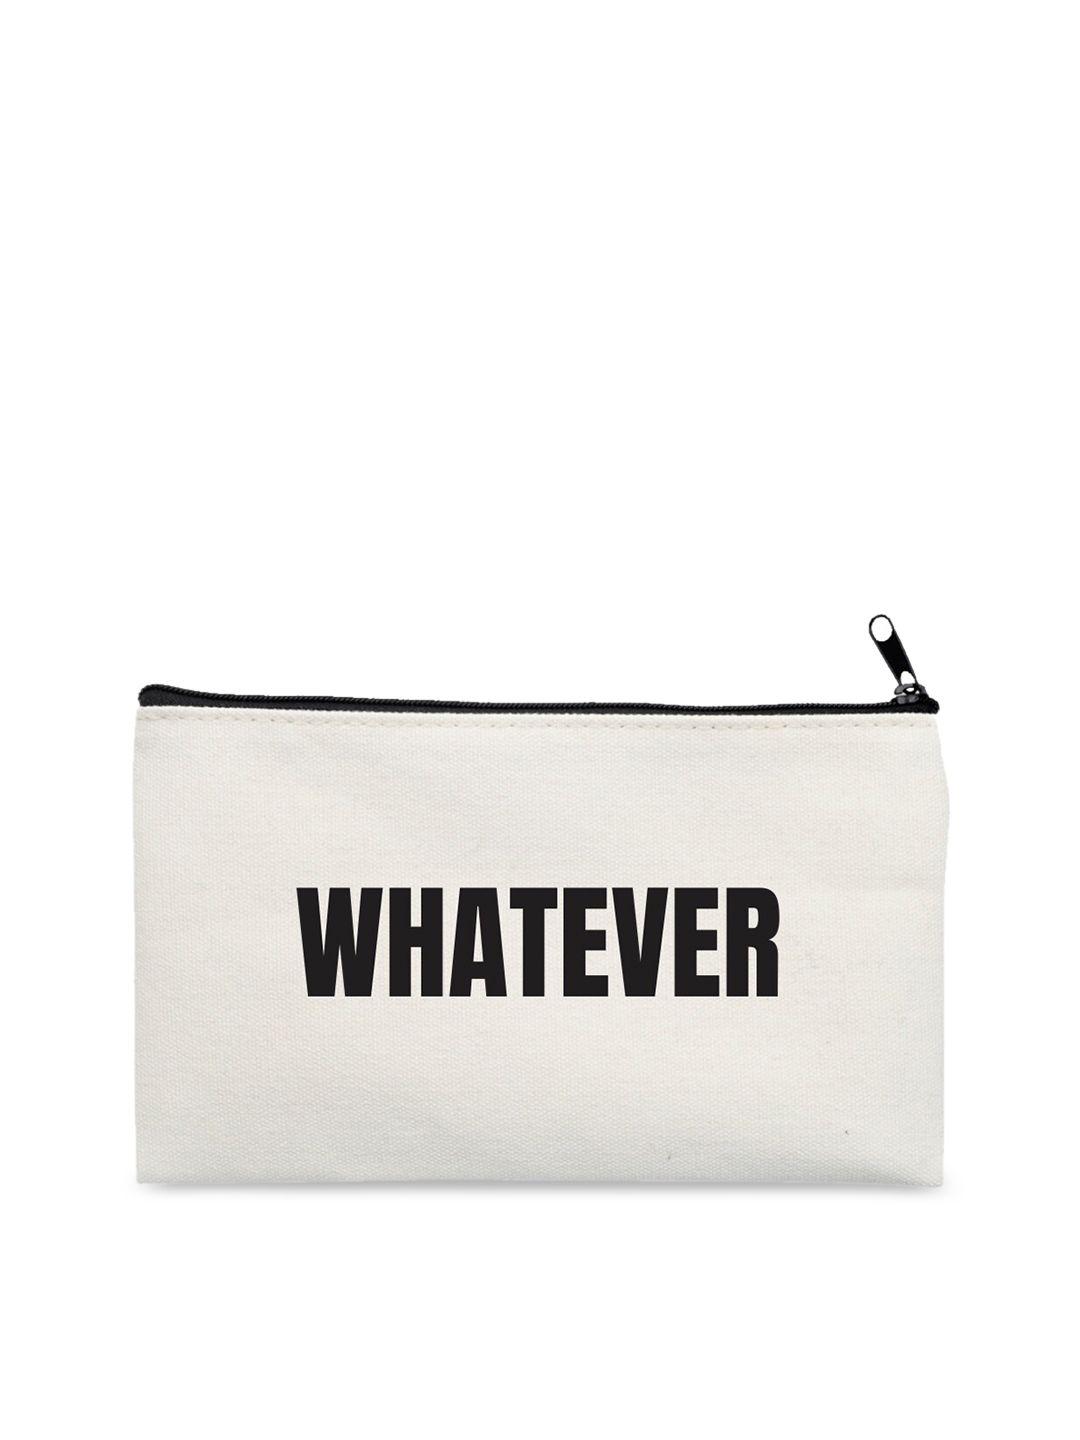 the art people off white & black printed travel pouch